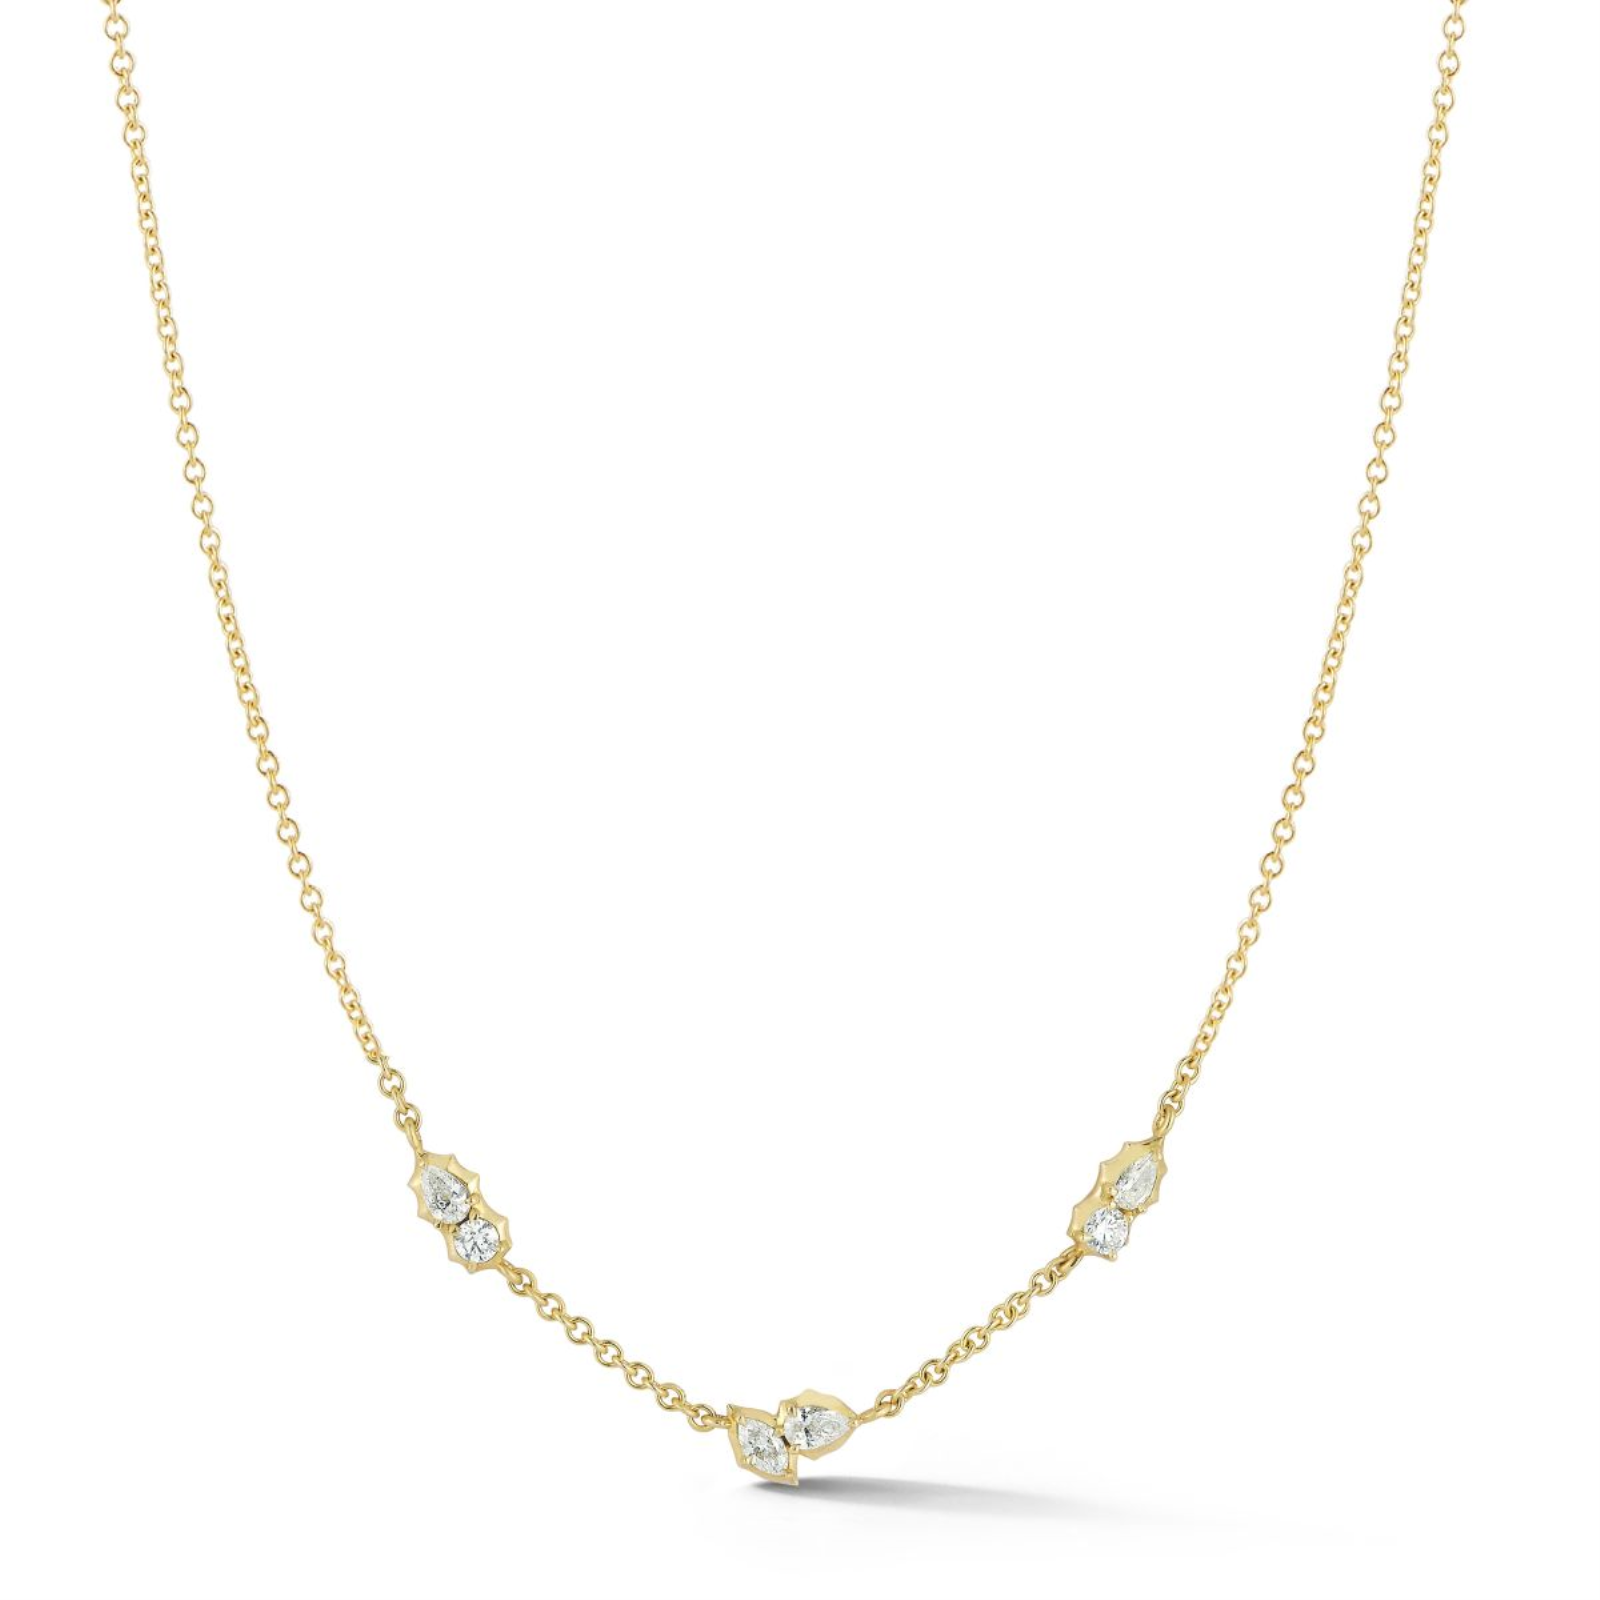 GOLD POSEY STATION NECKLACE